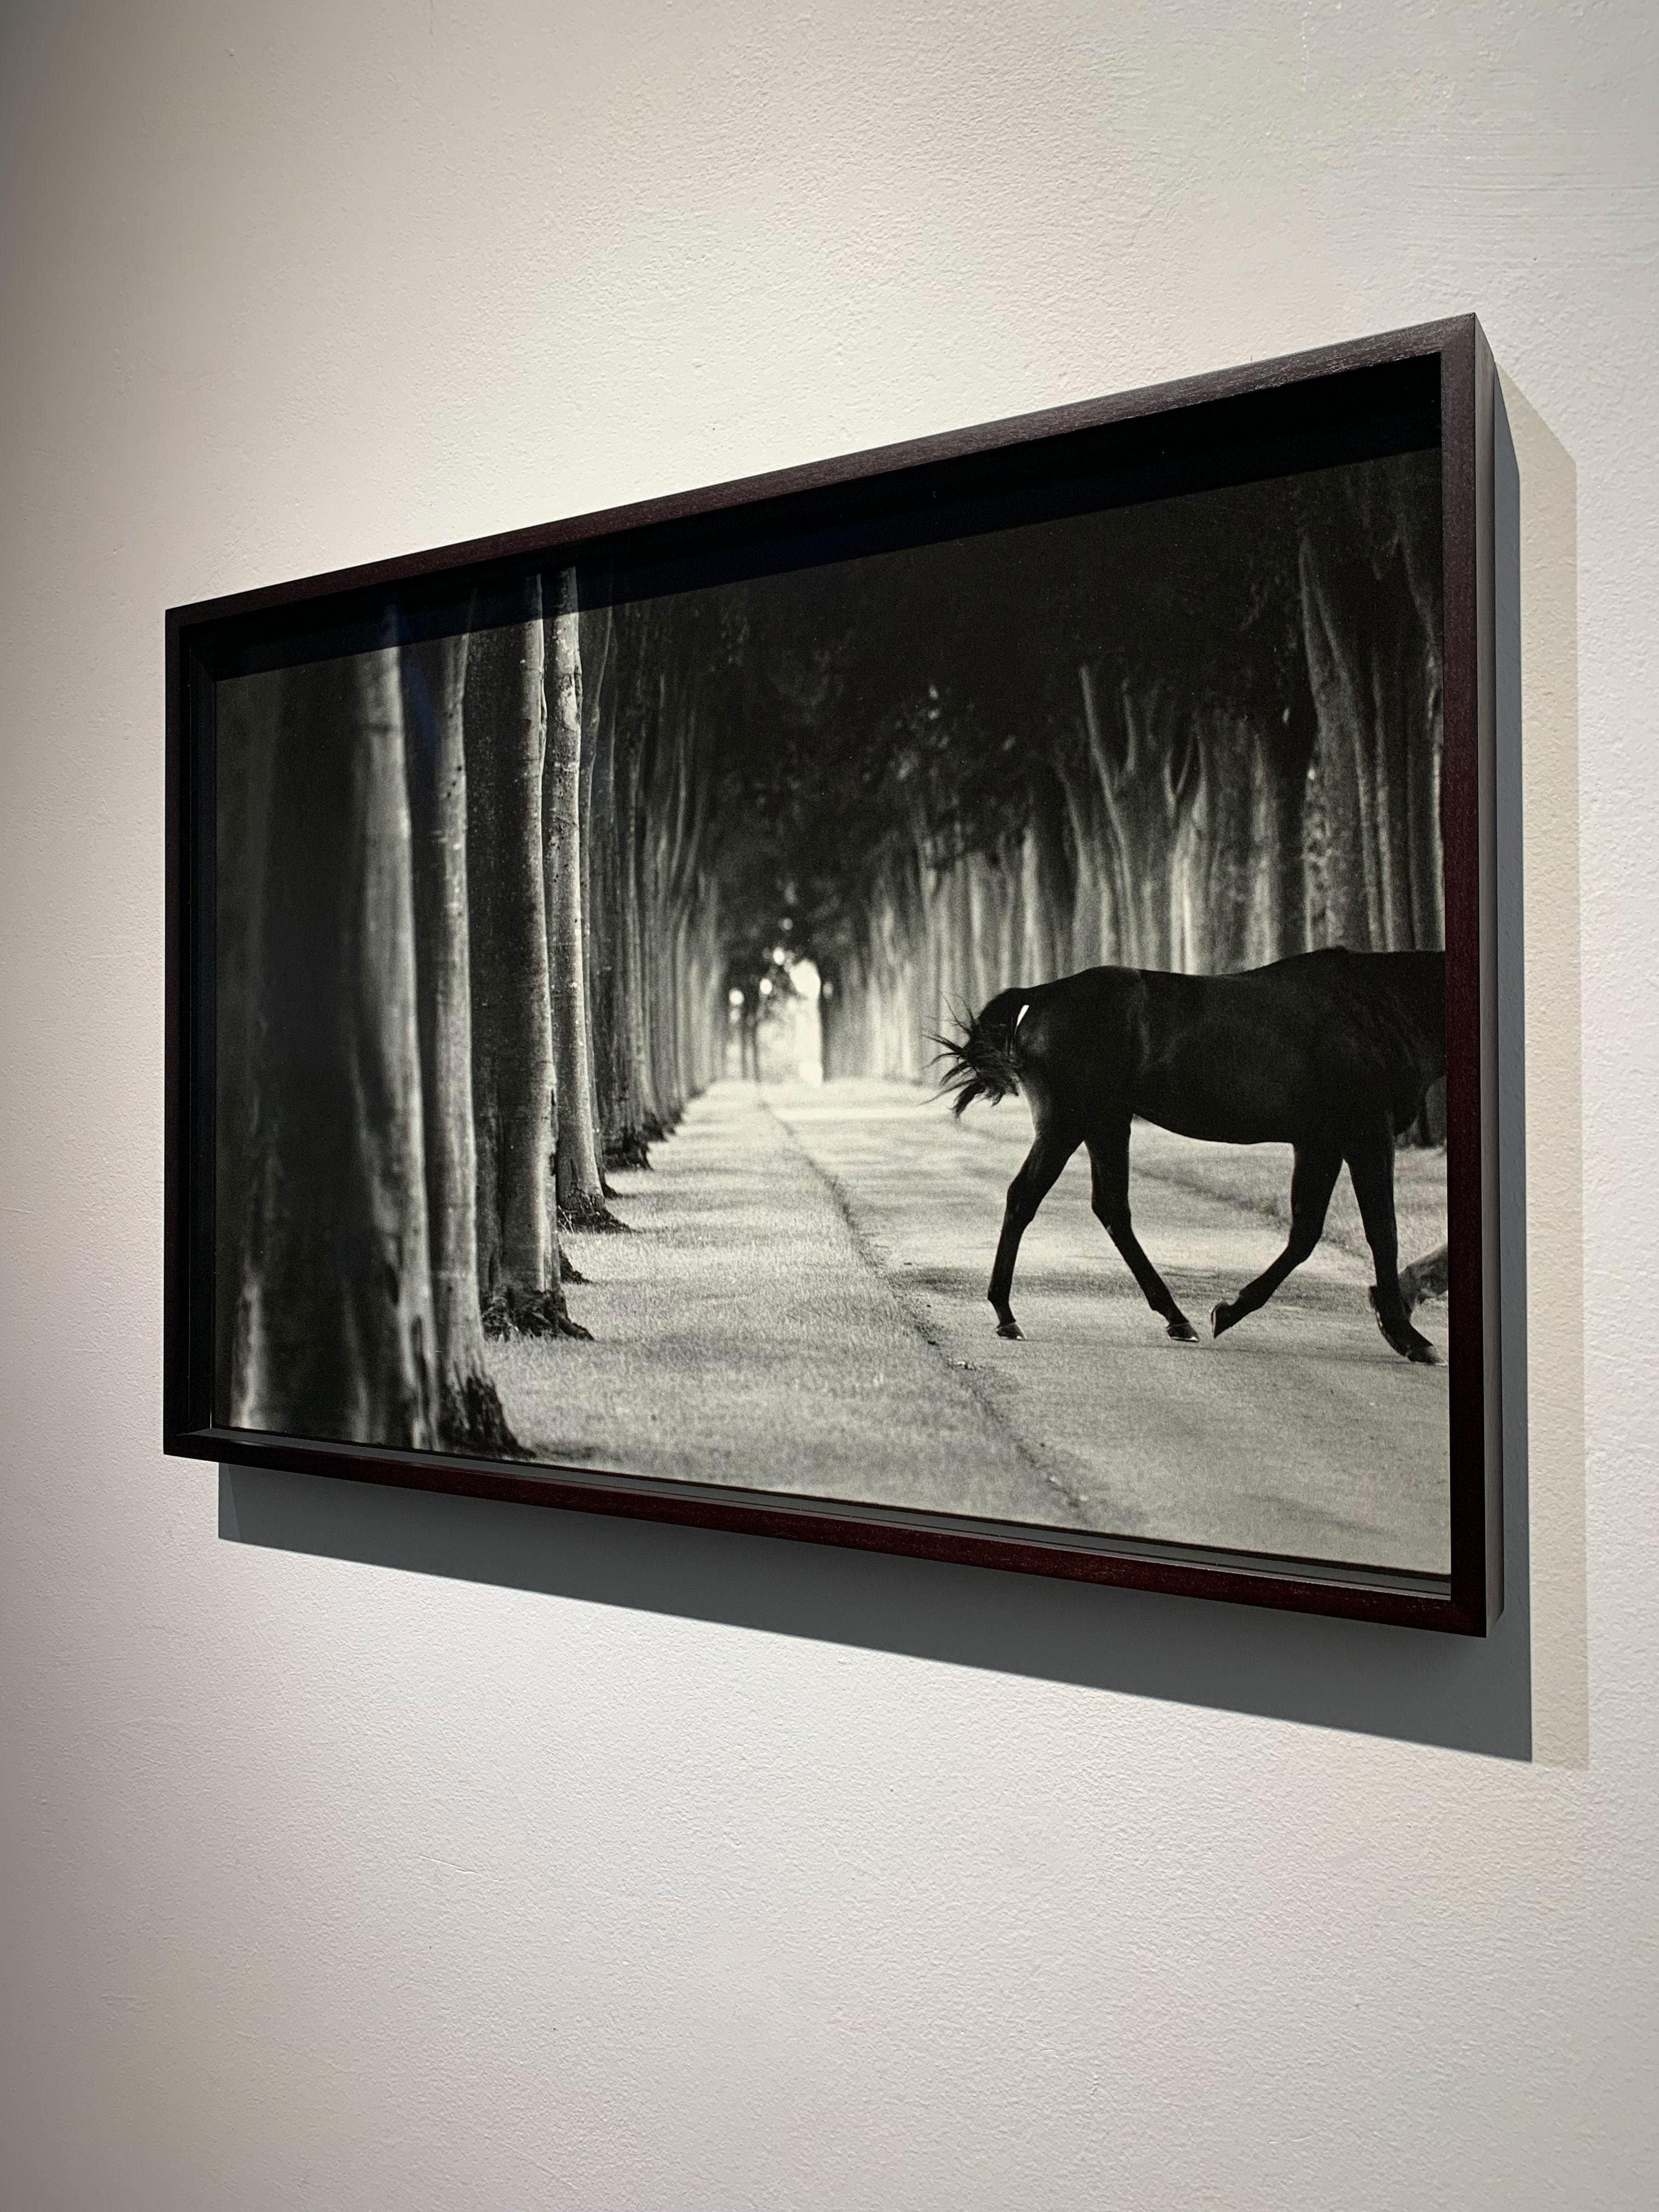 Kabool, 'Avenue of Trees’, 2001 by John Reardon
Edition of 15
Silver Gelatin Print, Mounted on Aluminium, Custom framed, UV protective Museum AR Glass

This piece is part of (after) Whistlejacket - Contemporary Equine Photographs exhibition at MMX